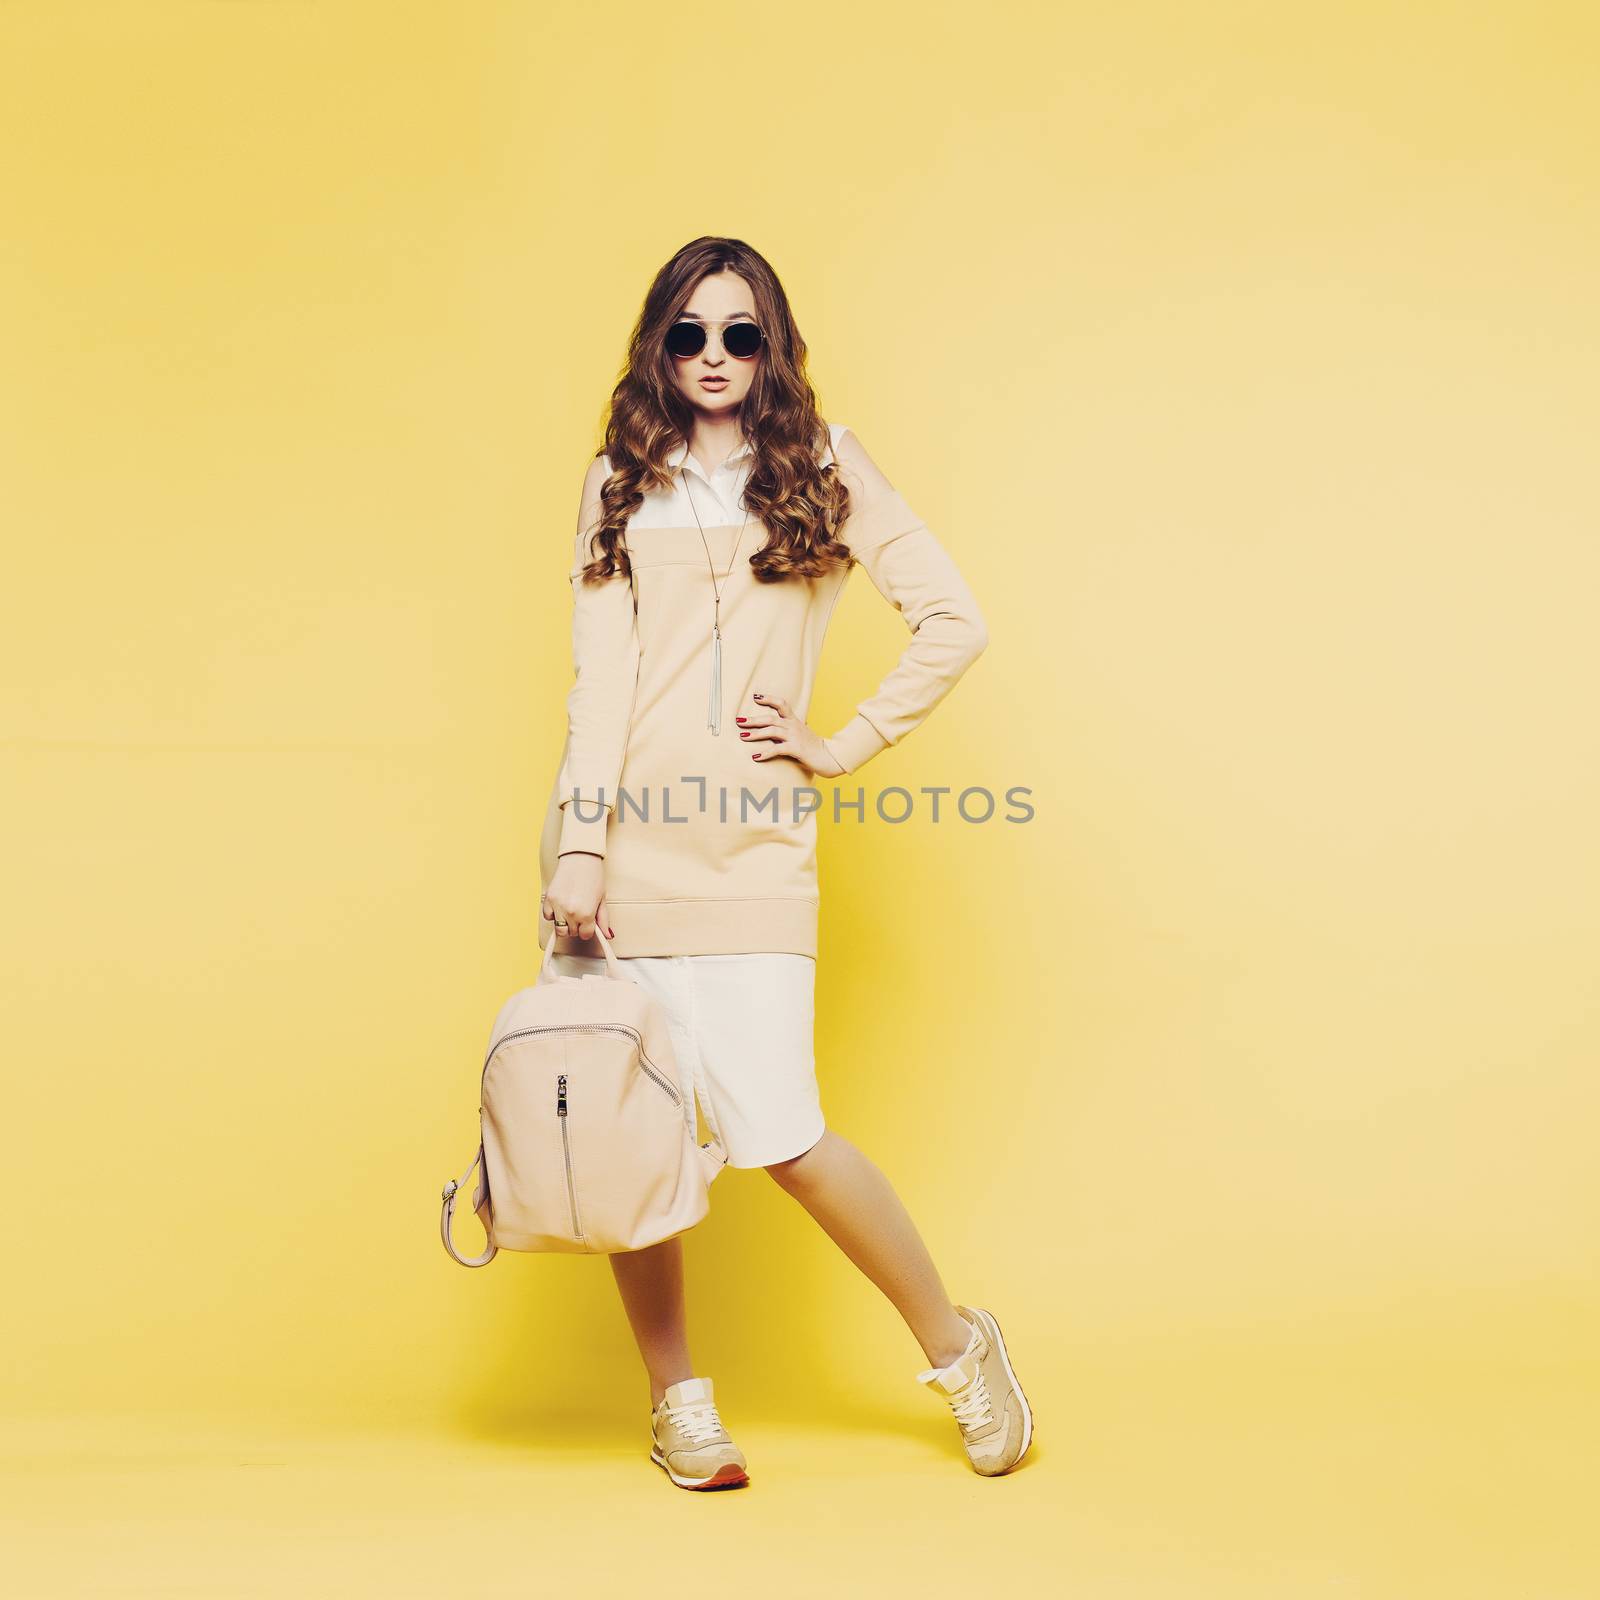 Fashionable beautiful brunette girl with wavy hair, perfect make up after beauty salon, wearing in white shirt and beige sweatshirt posing with hands on waist. Woman after shopping. Yellow background.